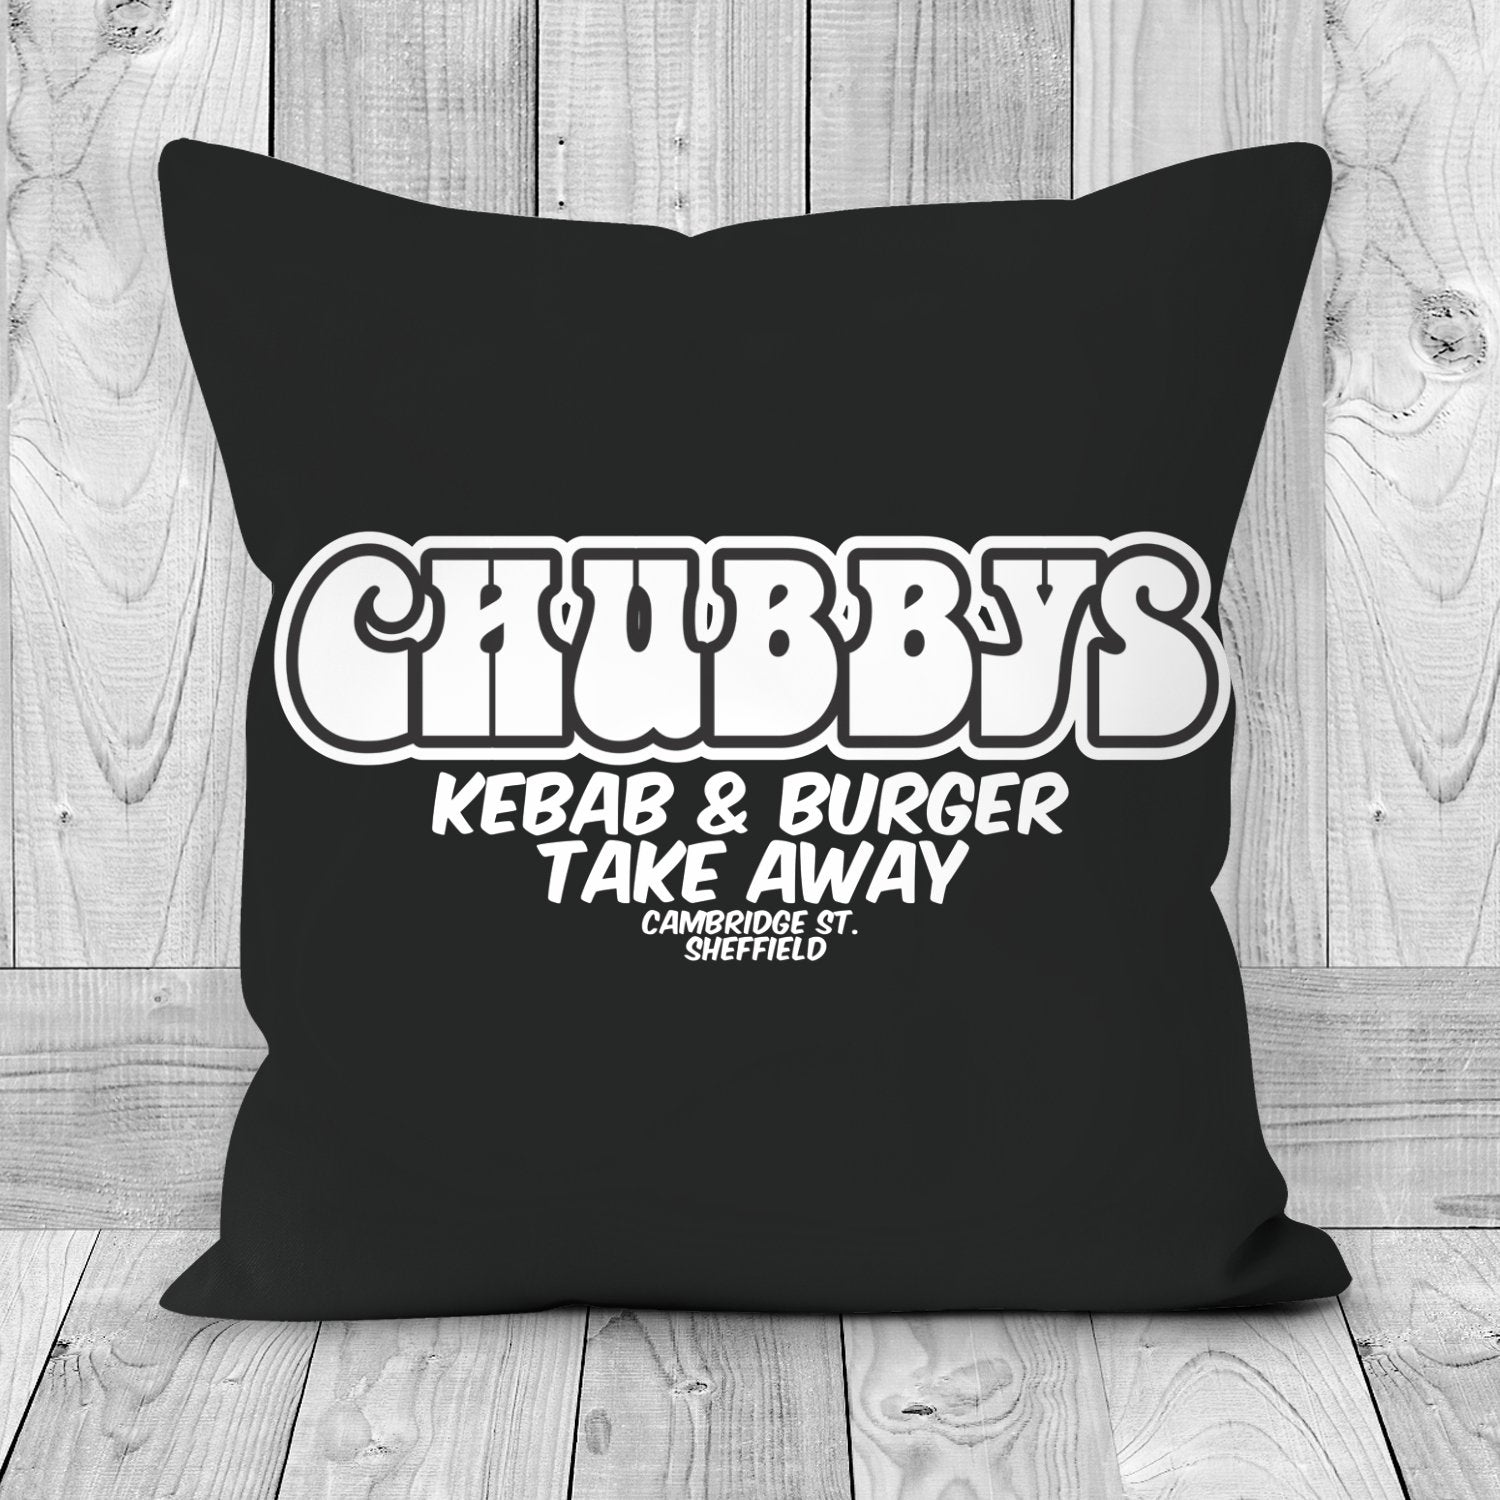 Chubbys - handmade cushion - Dirty Stop Outs